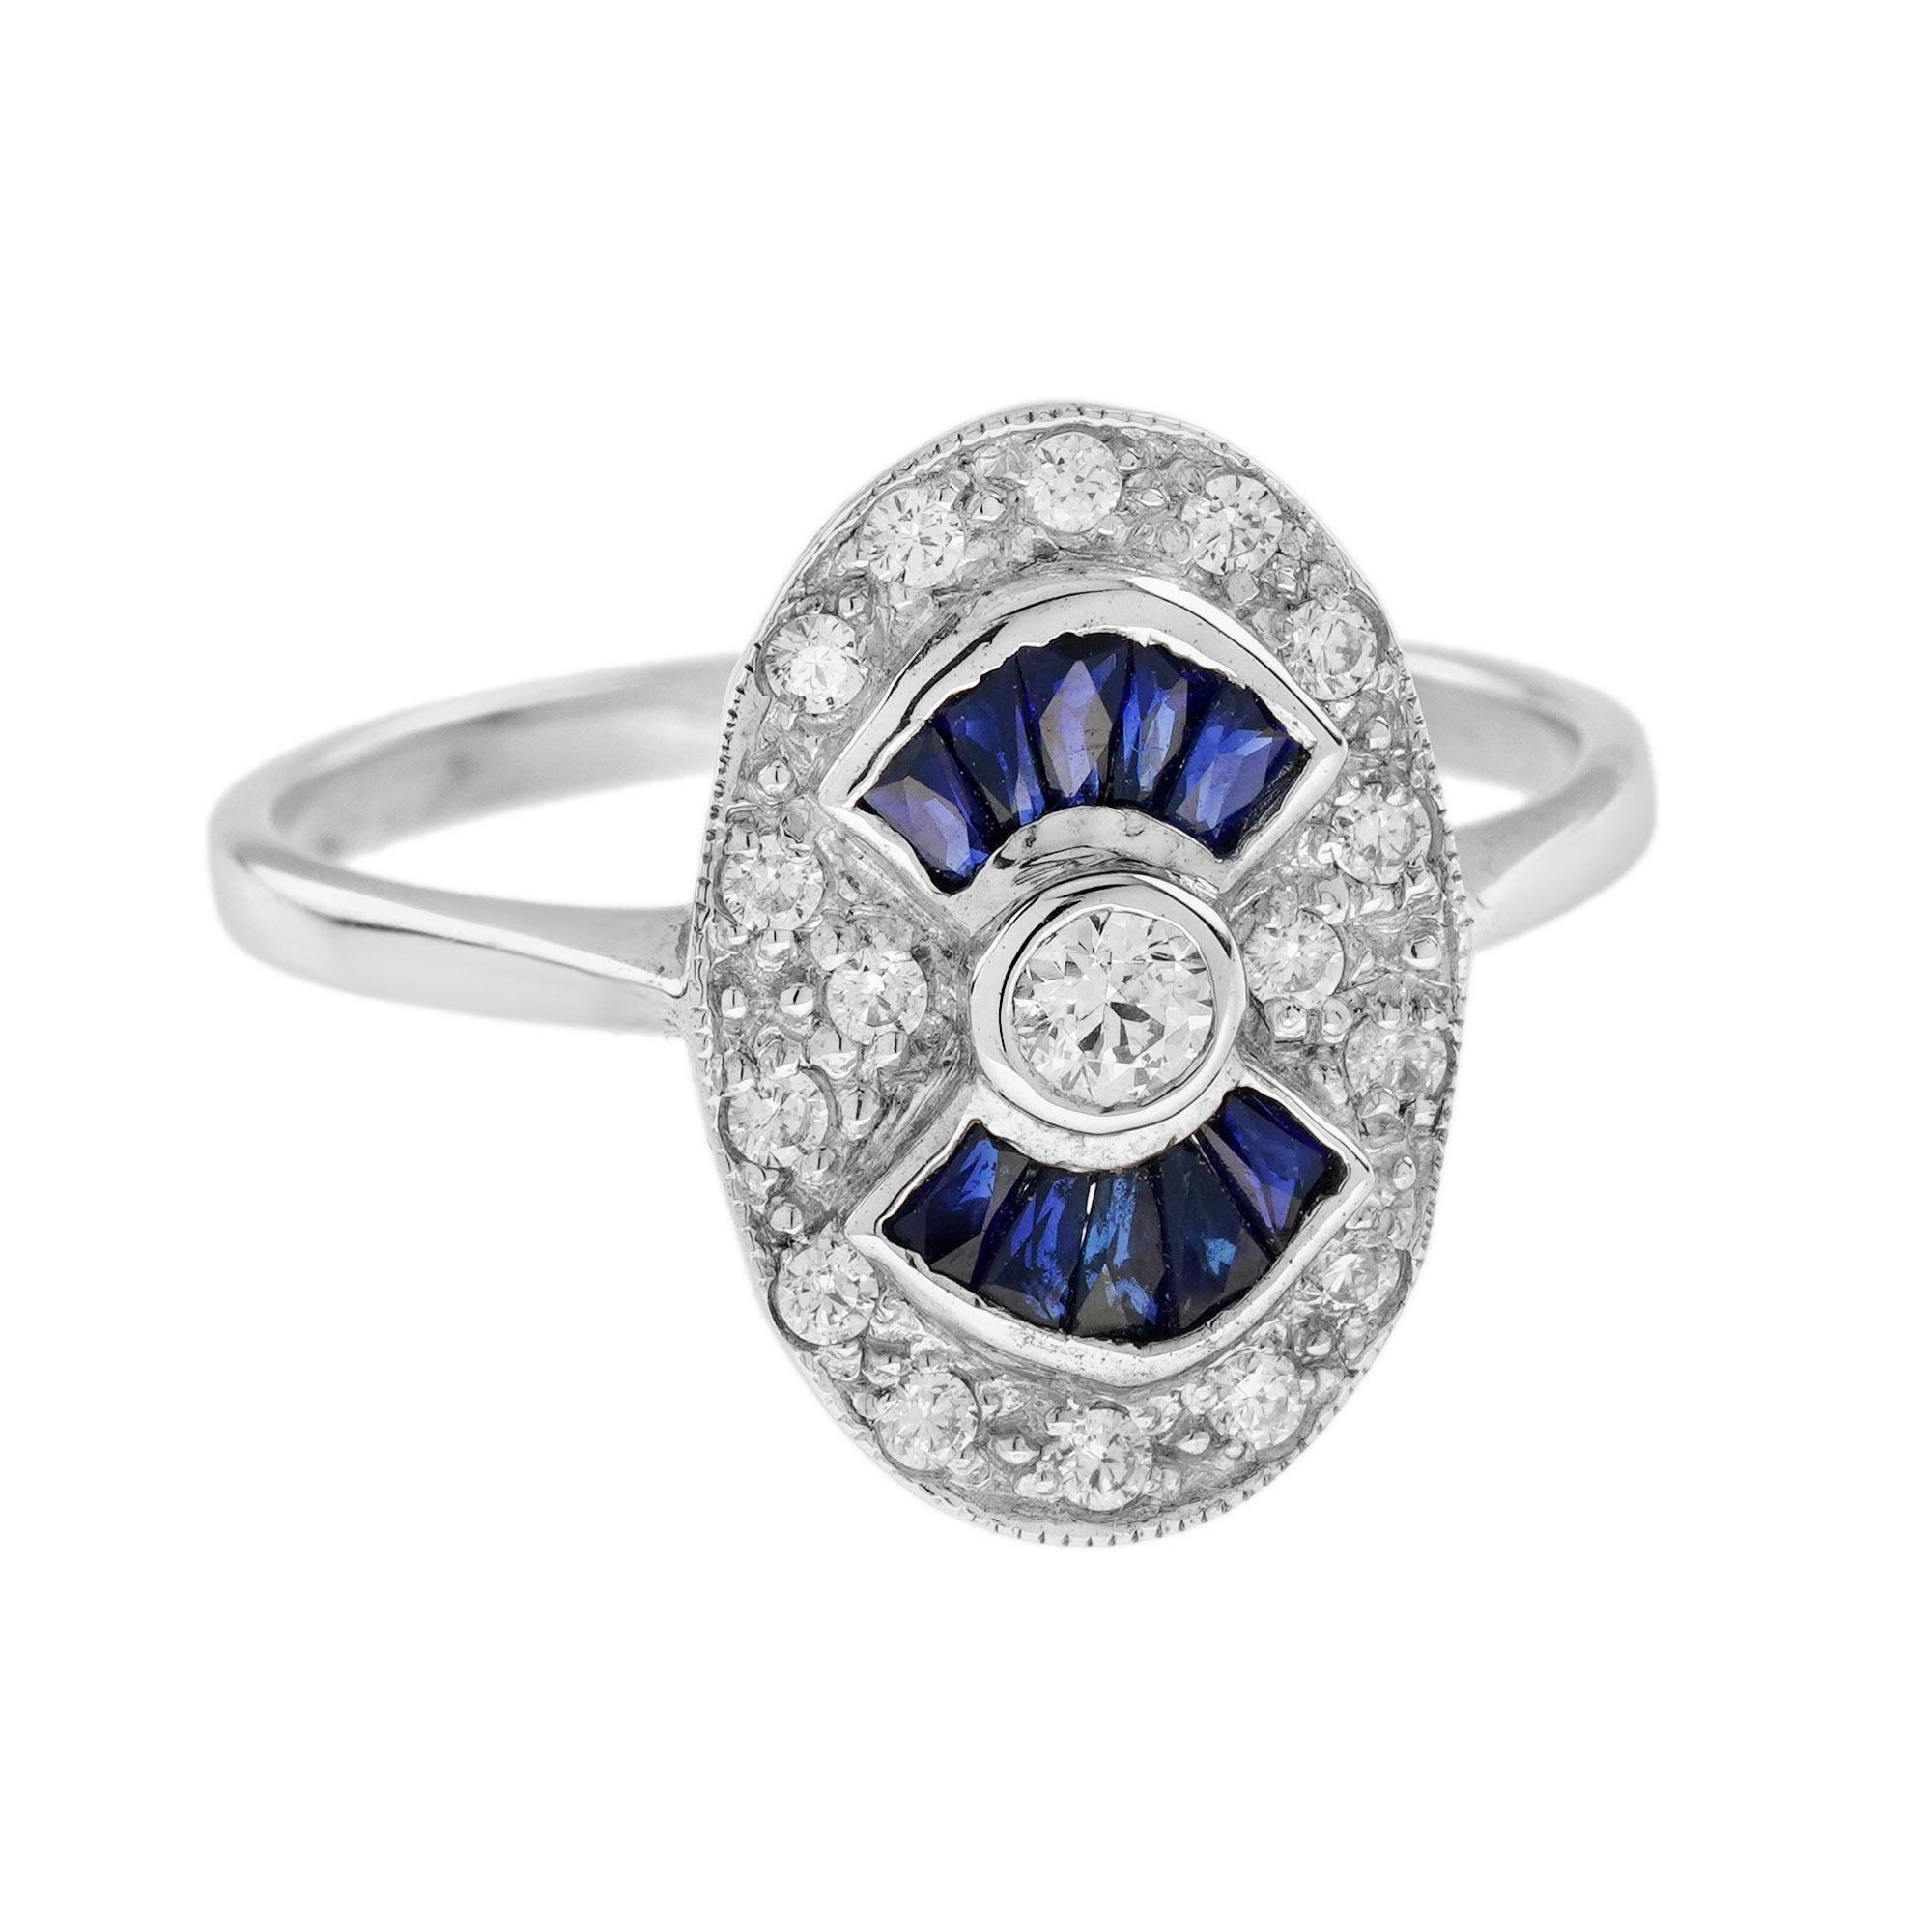 For Sale:  Diamond and Blue Sapphire Art Deco Style Oval Shaped Ring in 14K White Gold 3